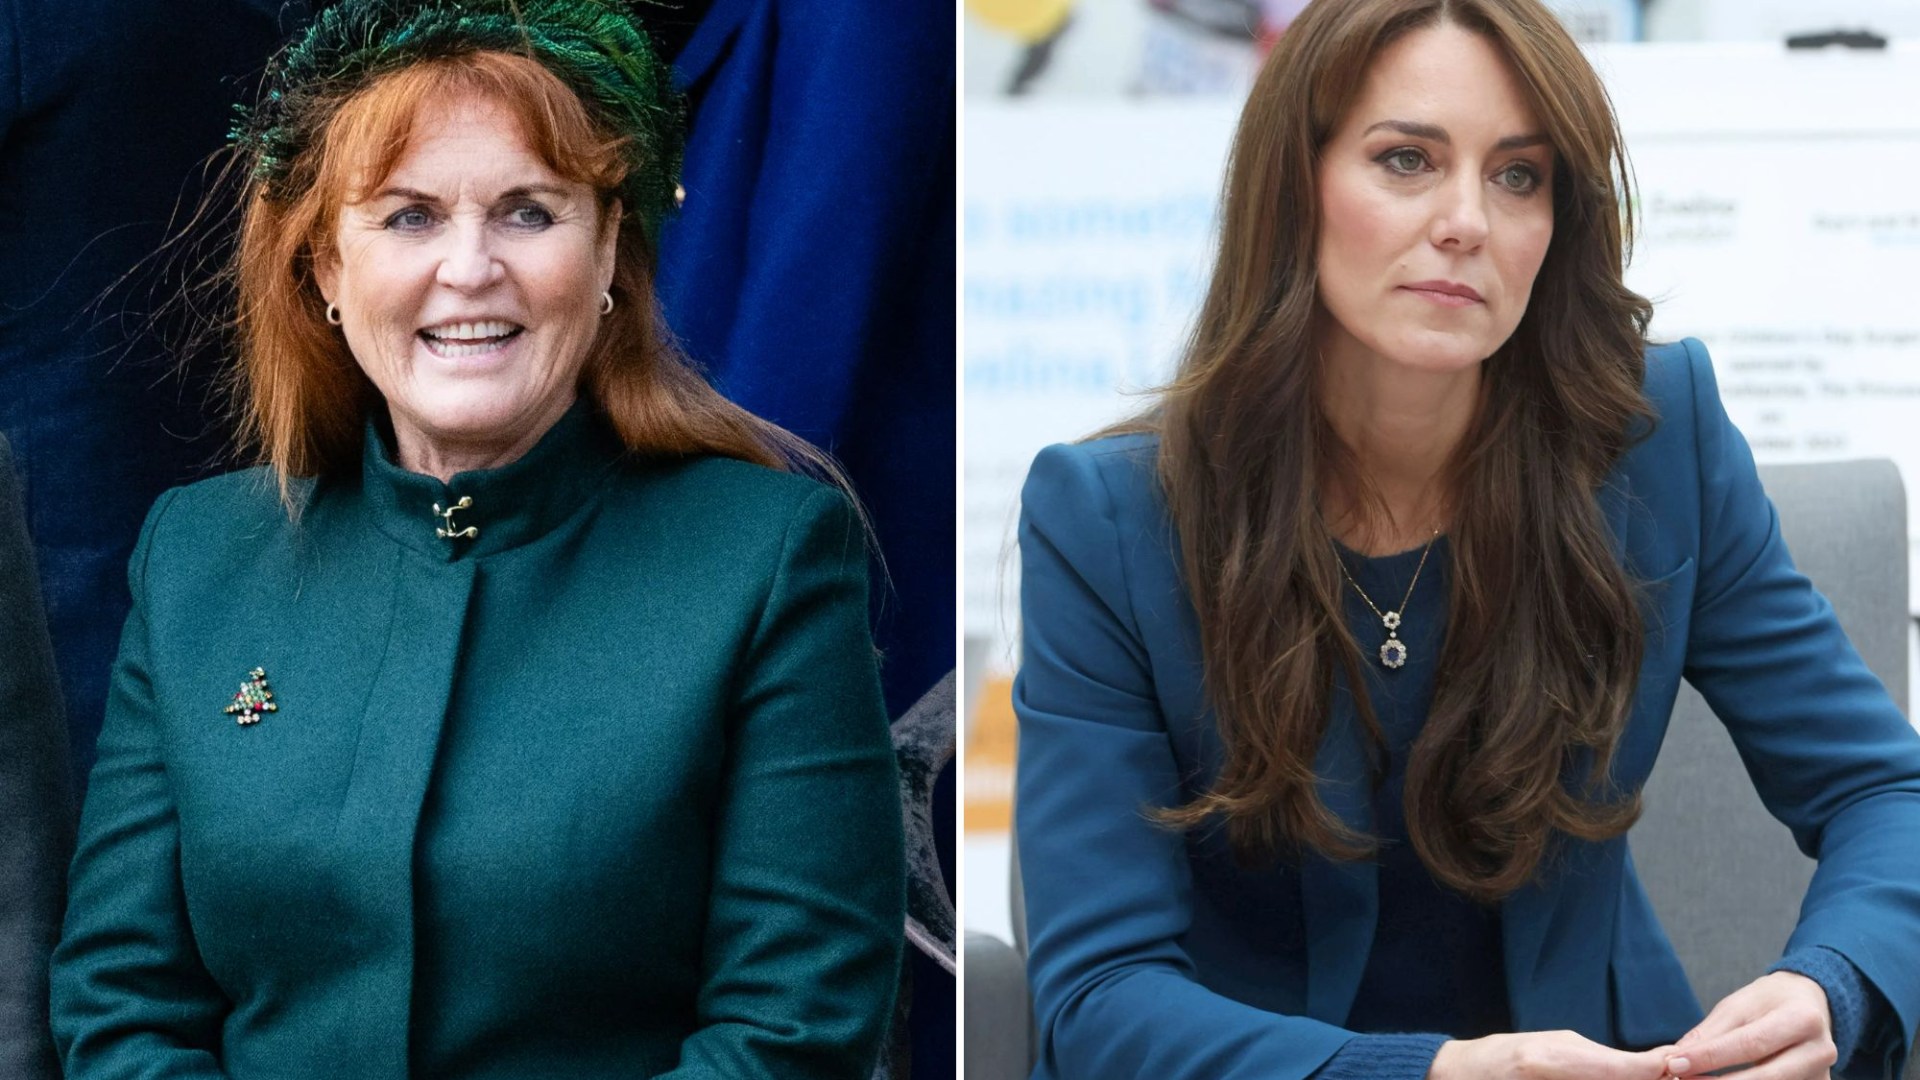 Sarah Ferguson shares touching message to Princess Kate saying she’s ‘full of admiration’ for her after cancer diagnosis [Video]